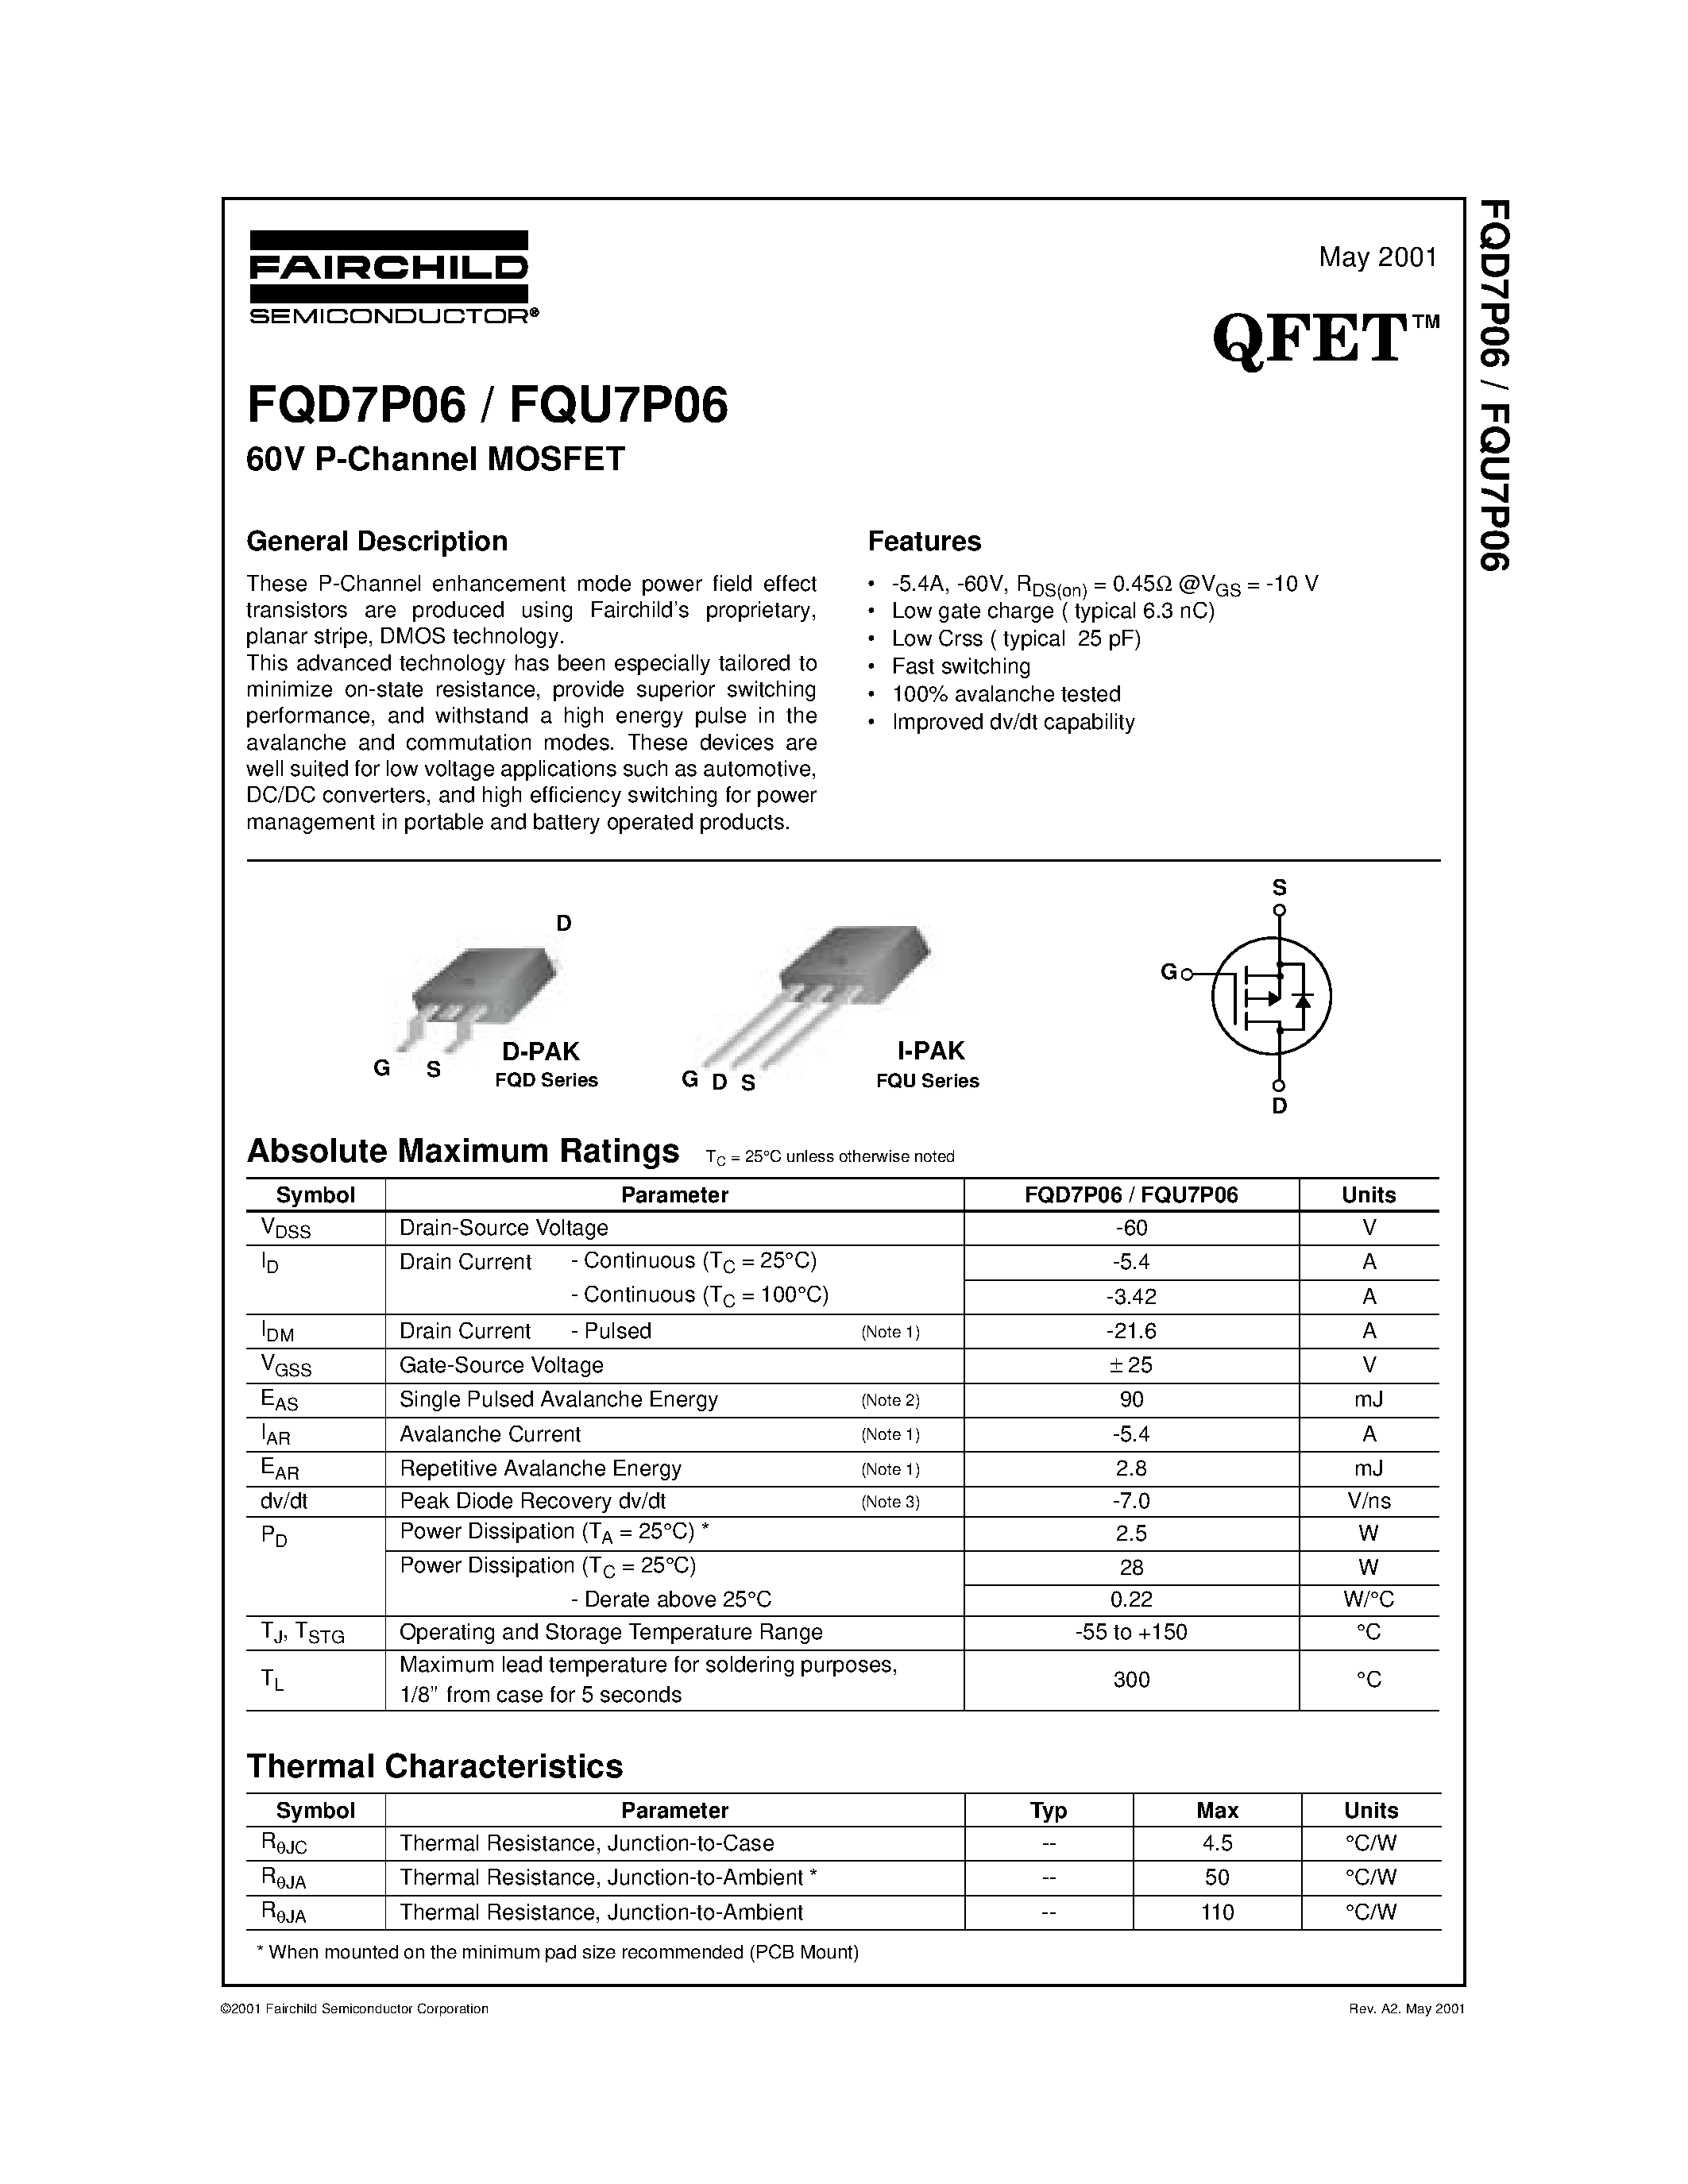 Datasheet FQD7P06 - 60V P-Channel MOSFET page 1